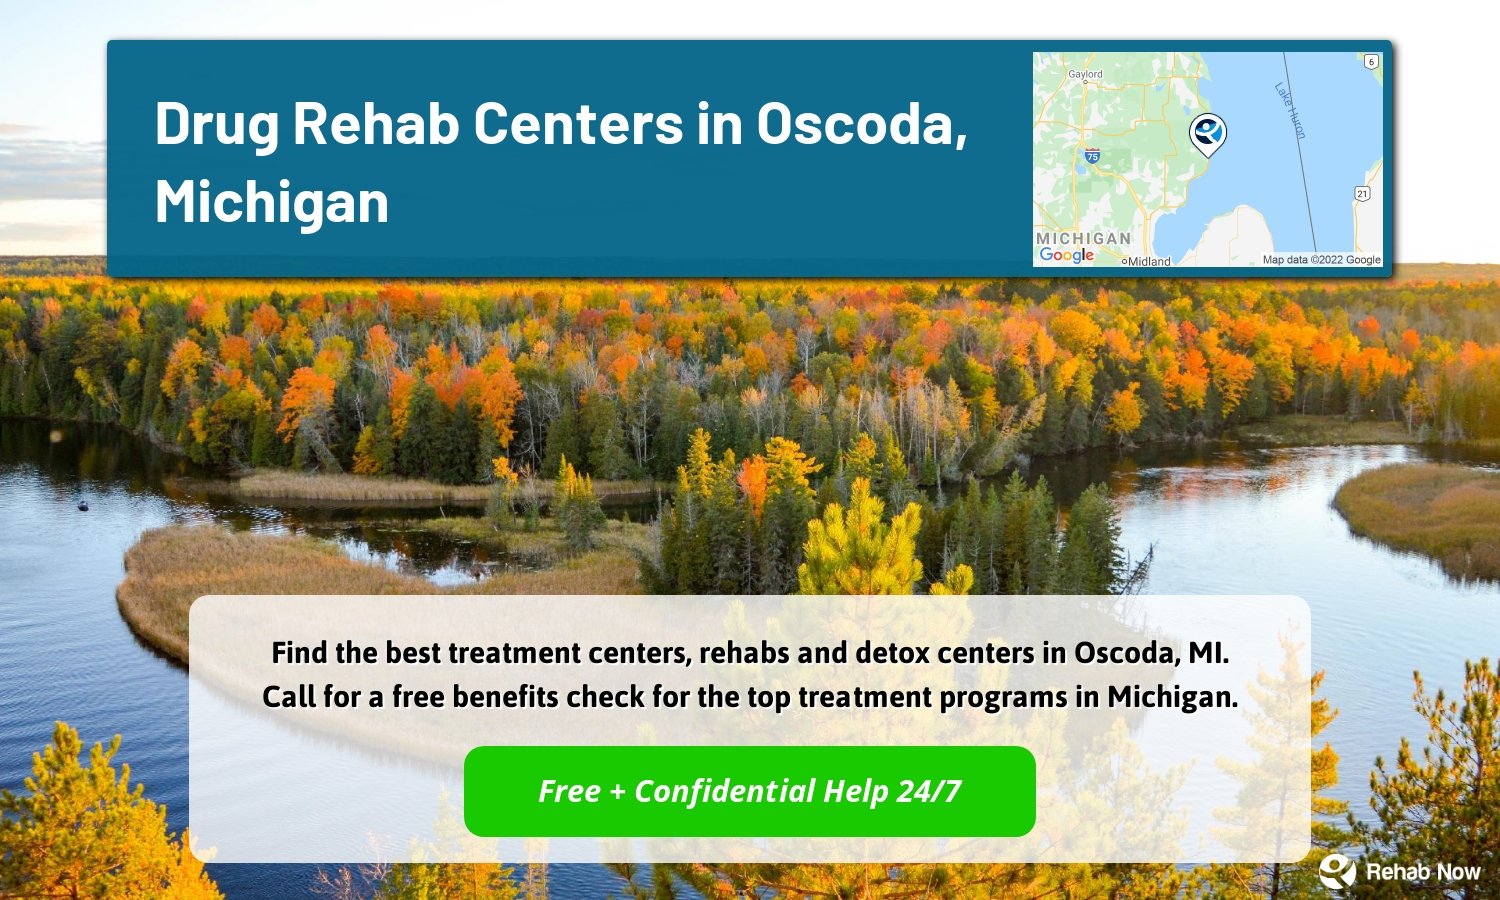 Find the best treatment centers, rehabs and detox centers in Oscoda, MI. Call for a free benefits check for the top treatment programs in Michigan.